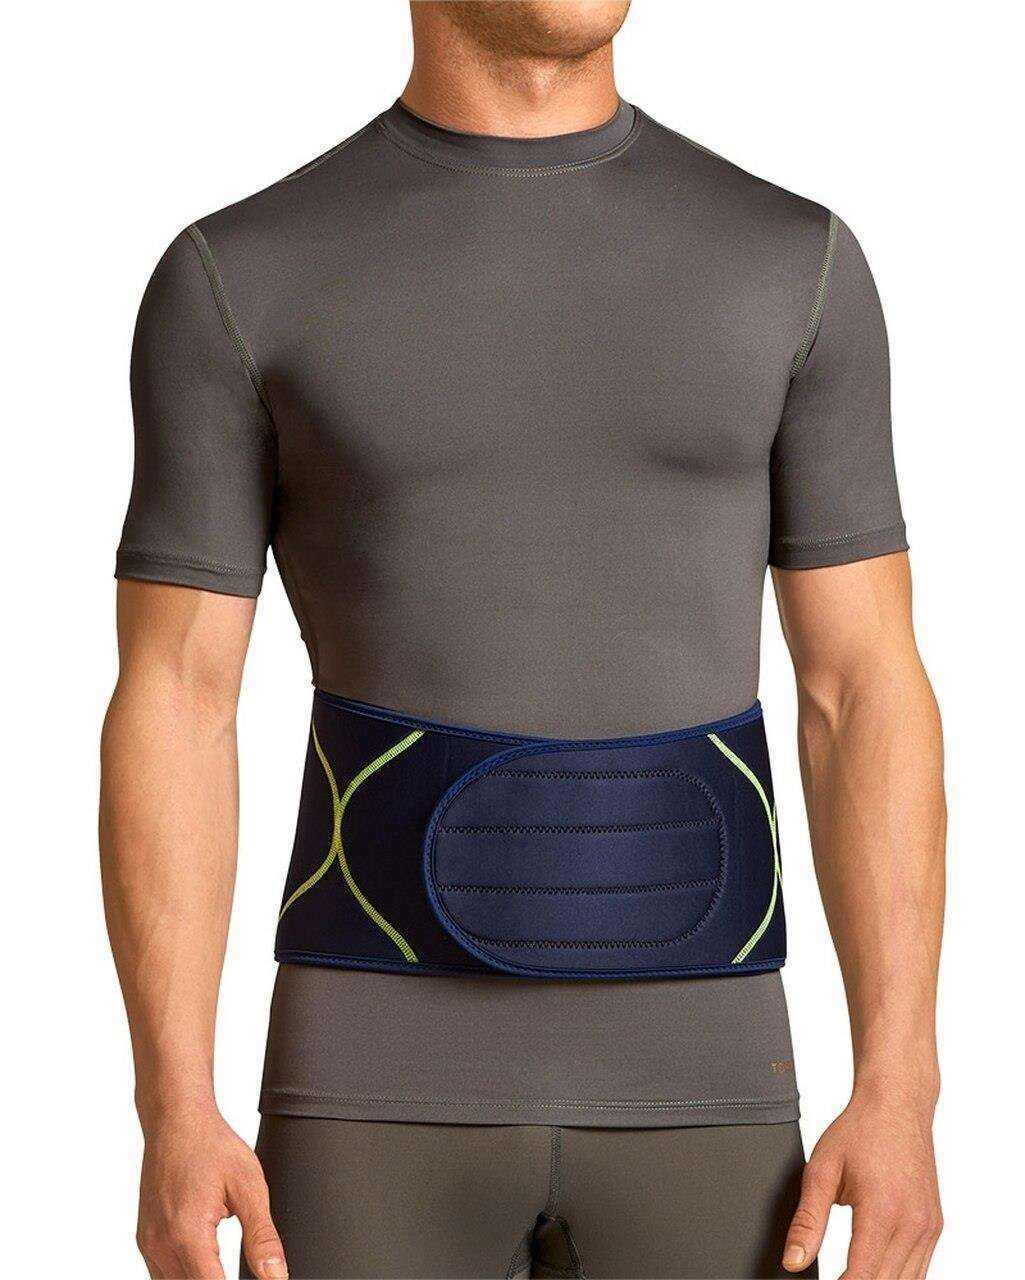 https://cdn11.bigcommerce.com/s-62tlfv23od/images/stencil/original/products/117/2640/men-comfort-back-brace-navy-safety-yellow-front-view__25261.1632744249.jpg?c=1